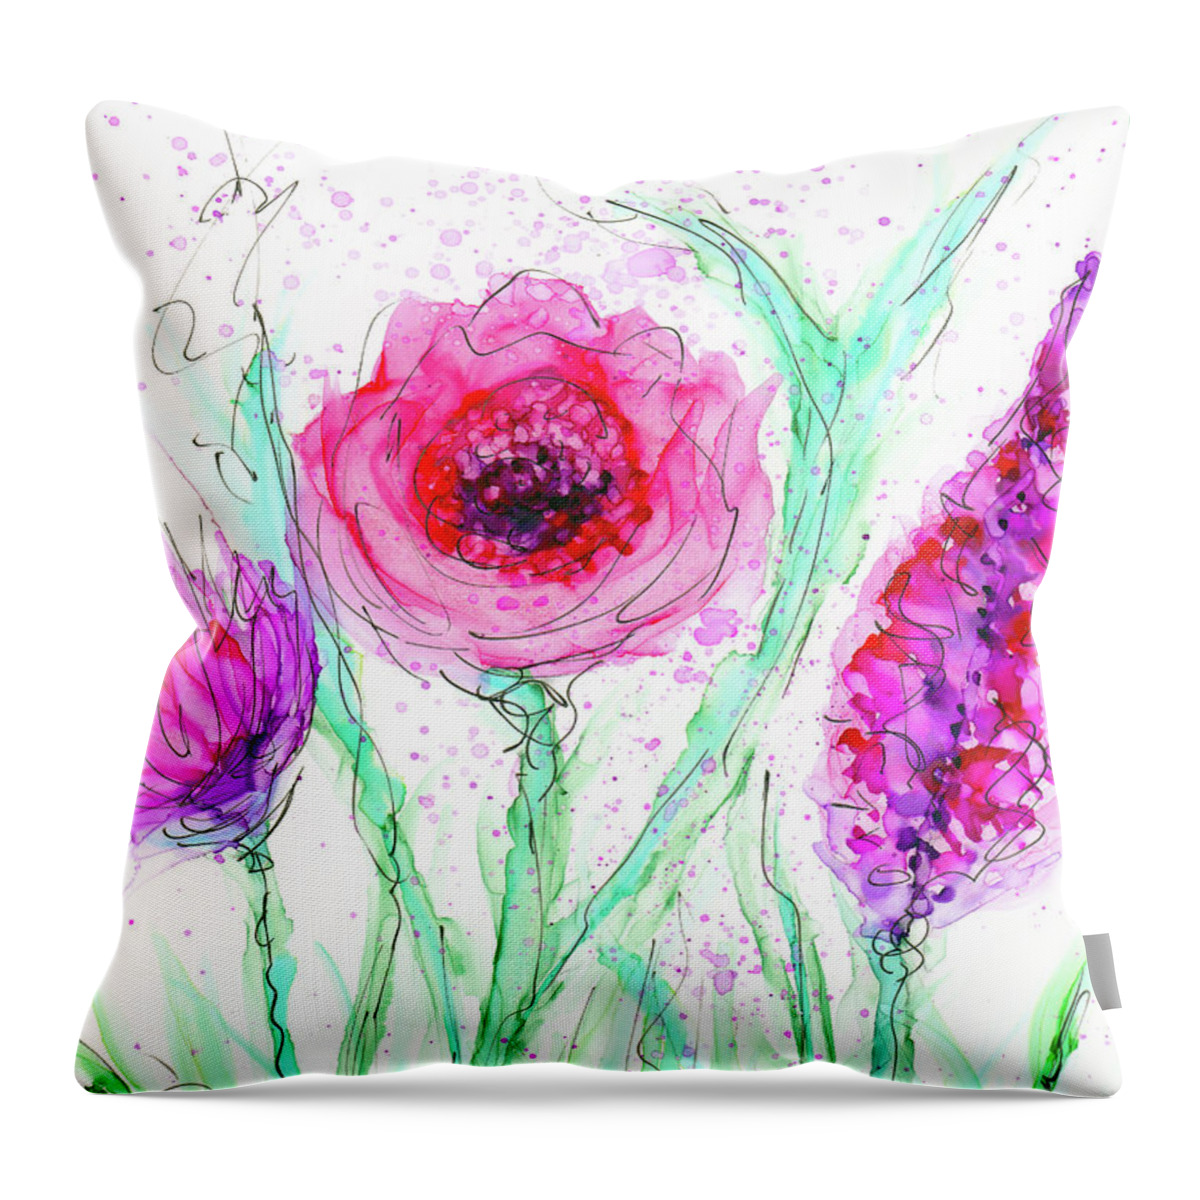 Flower Throw Pillow featuring the painting Acceptance by Kimberly Deene Langlois